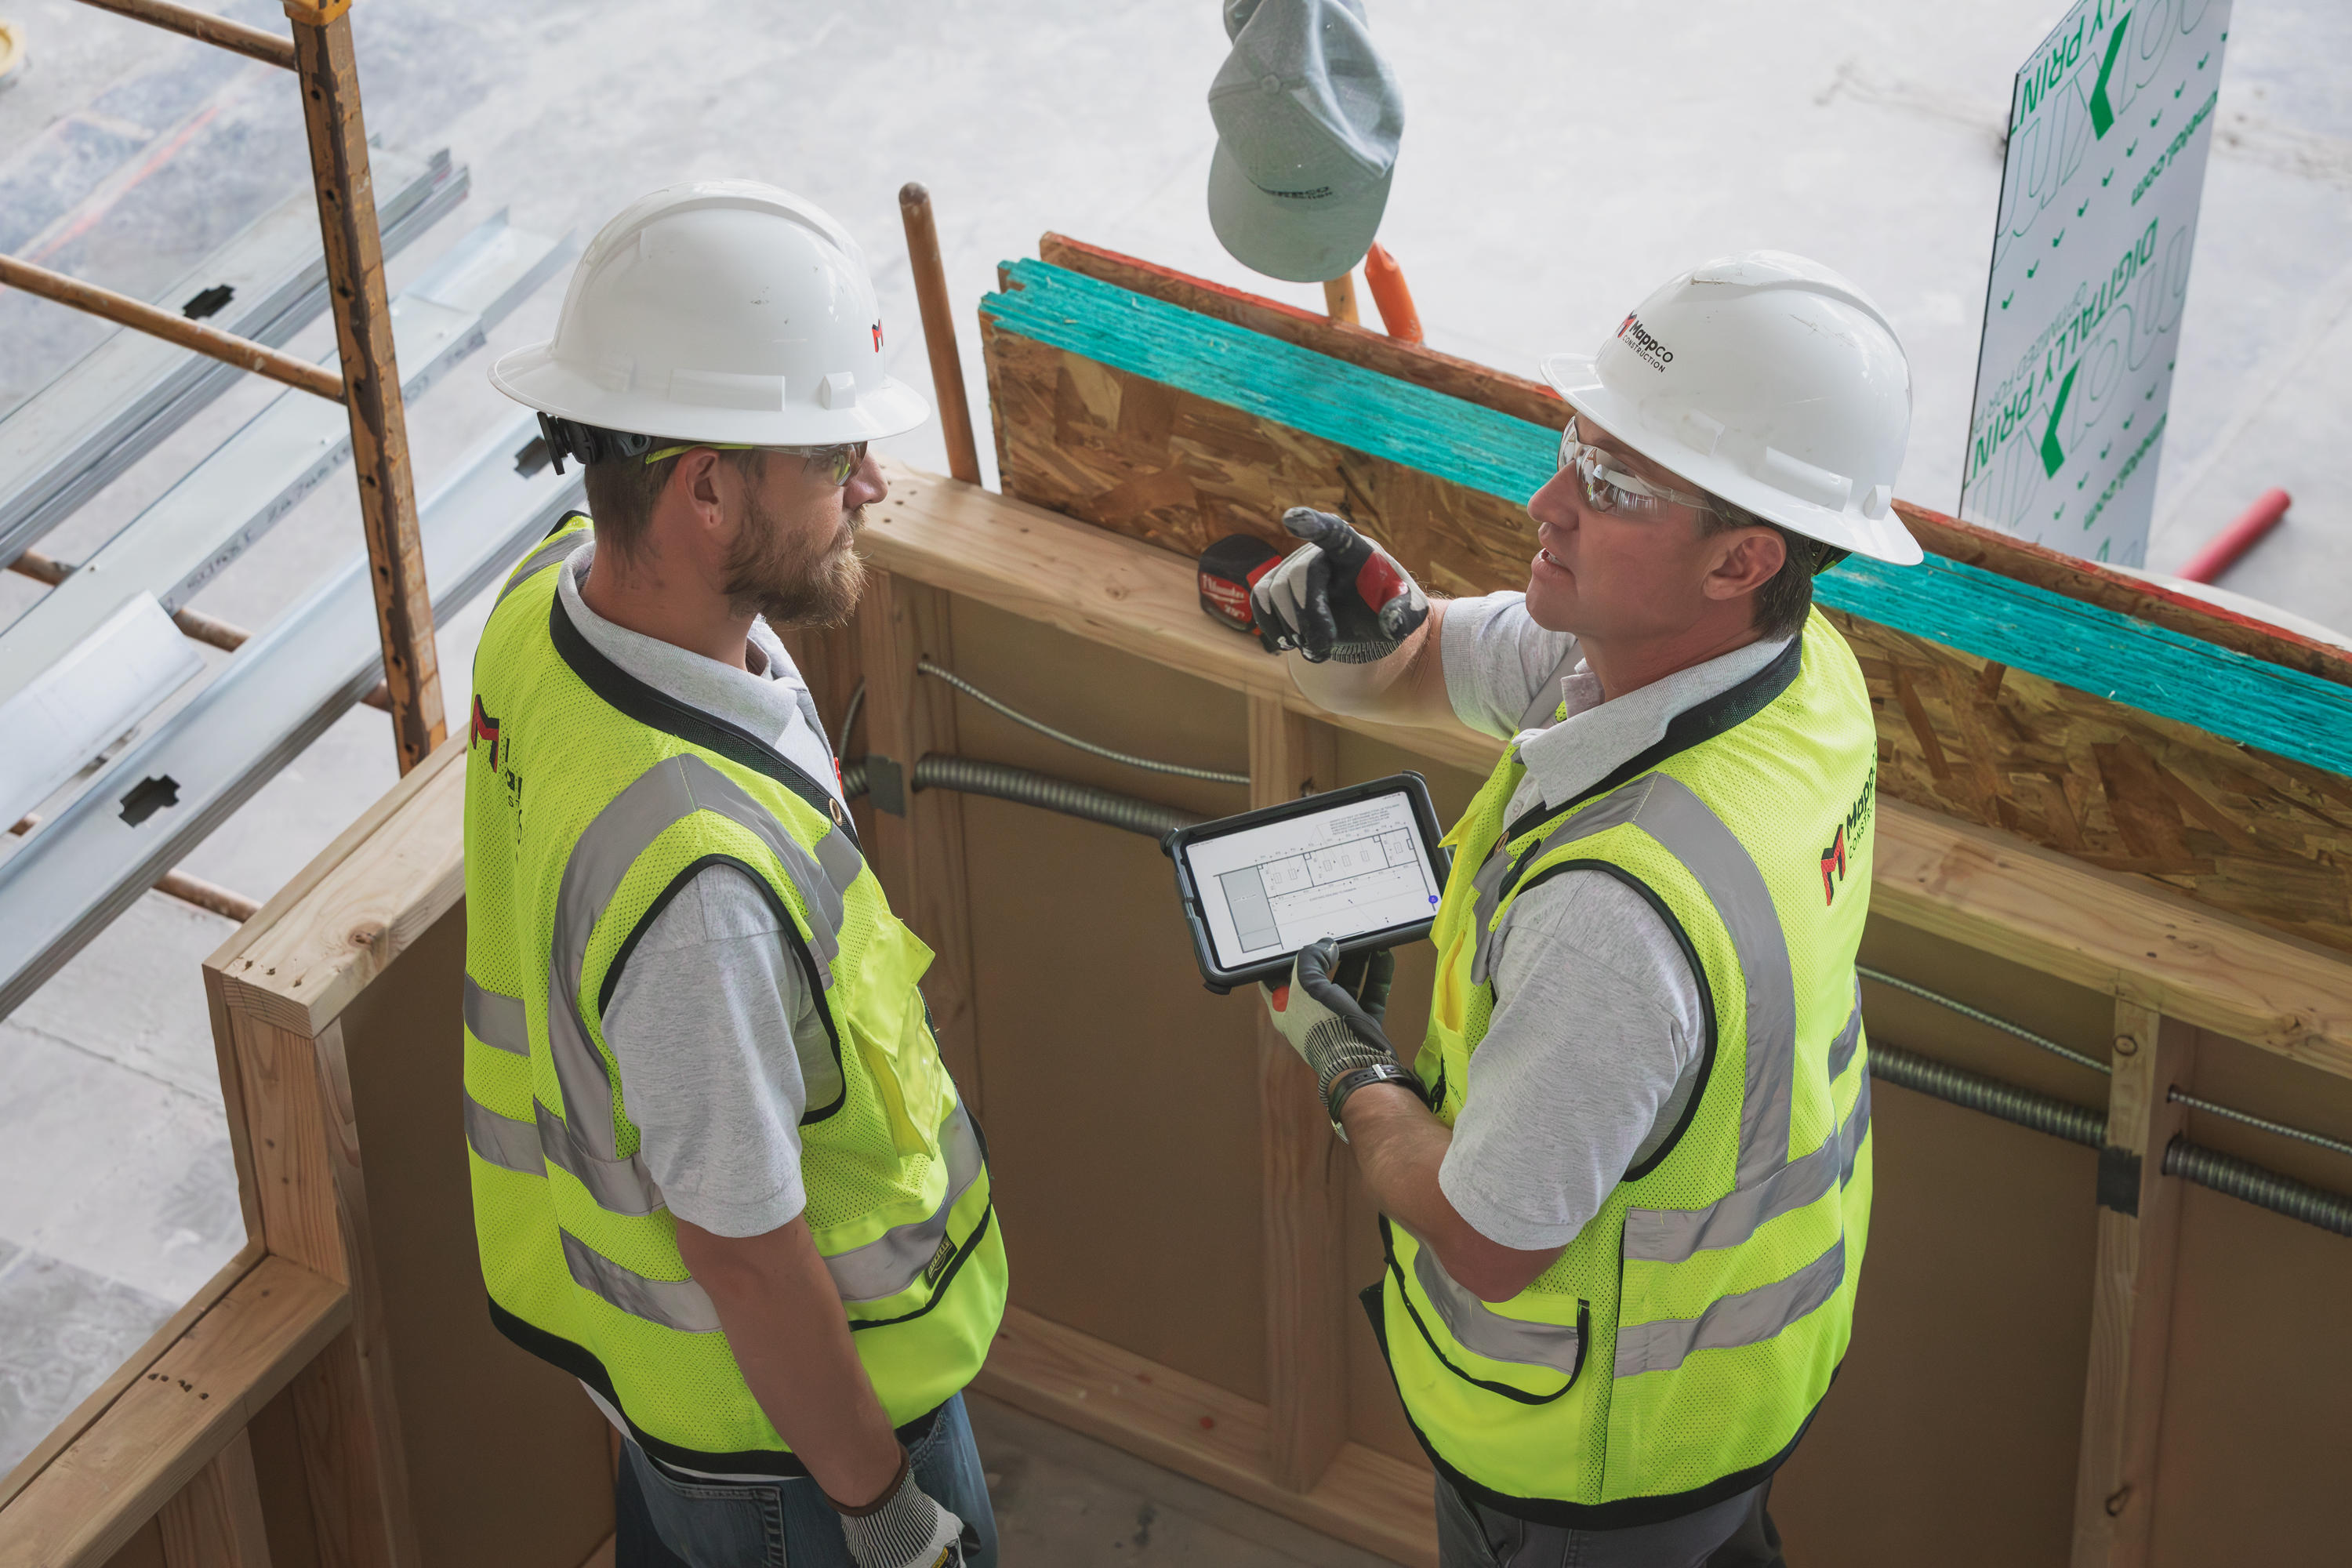 Two Mappco Construction professionals are in the midst of a project site consultation. Chad Mapp, on the right, is holding a tablet, displaying blueprints or project plans, while gesturing towards an area of interest. They stand within a partially completed structure, surrounded by building materials and insulation layers.